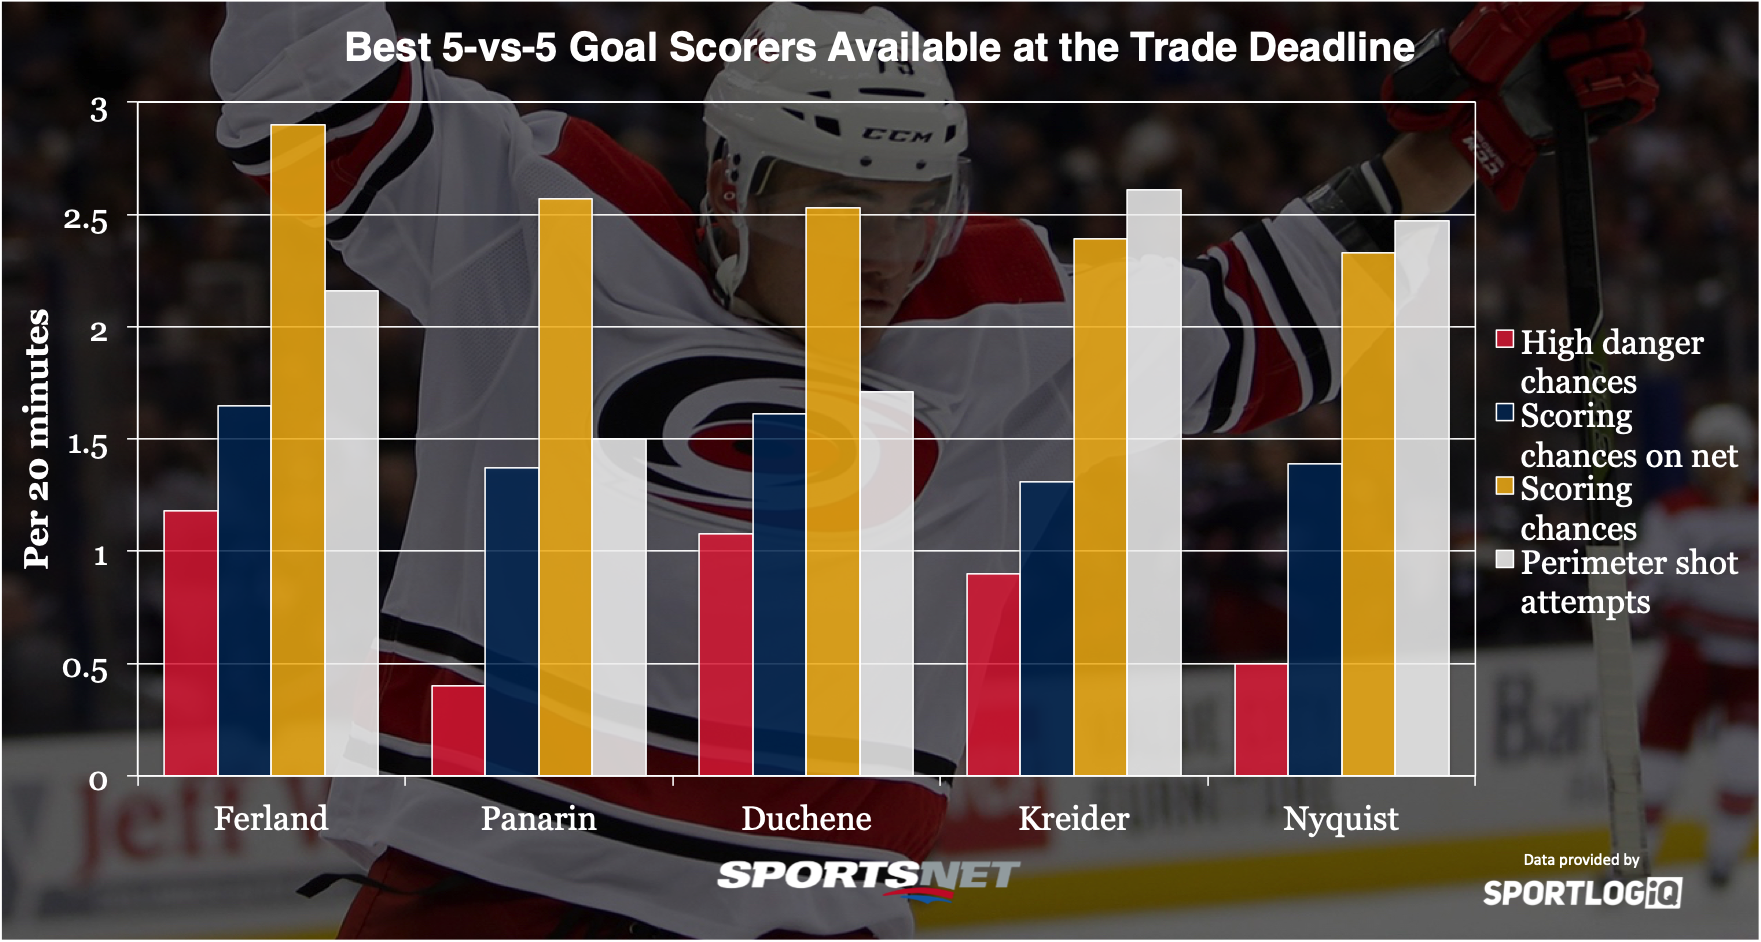 Analyzing the best goal scorers available at the NHL trade deadline